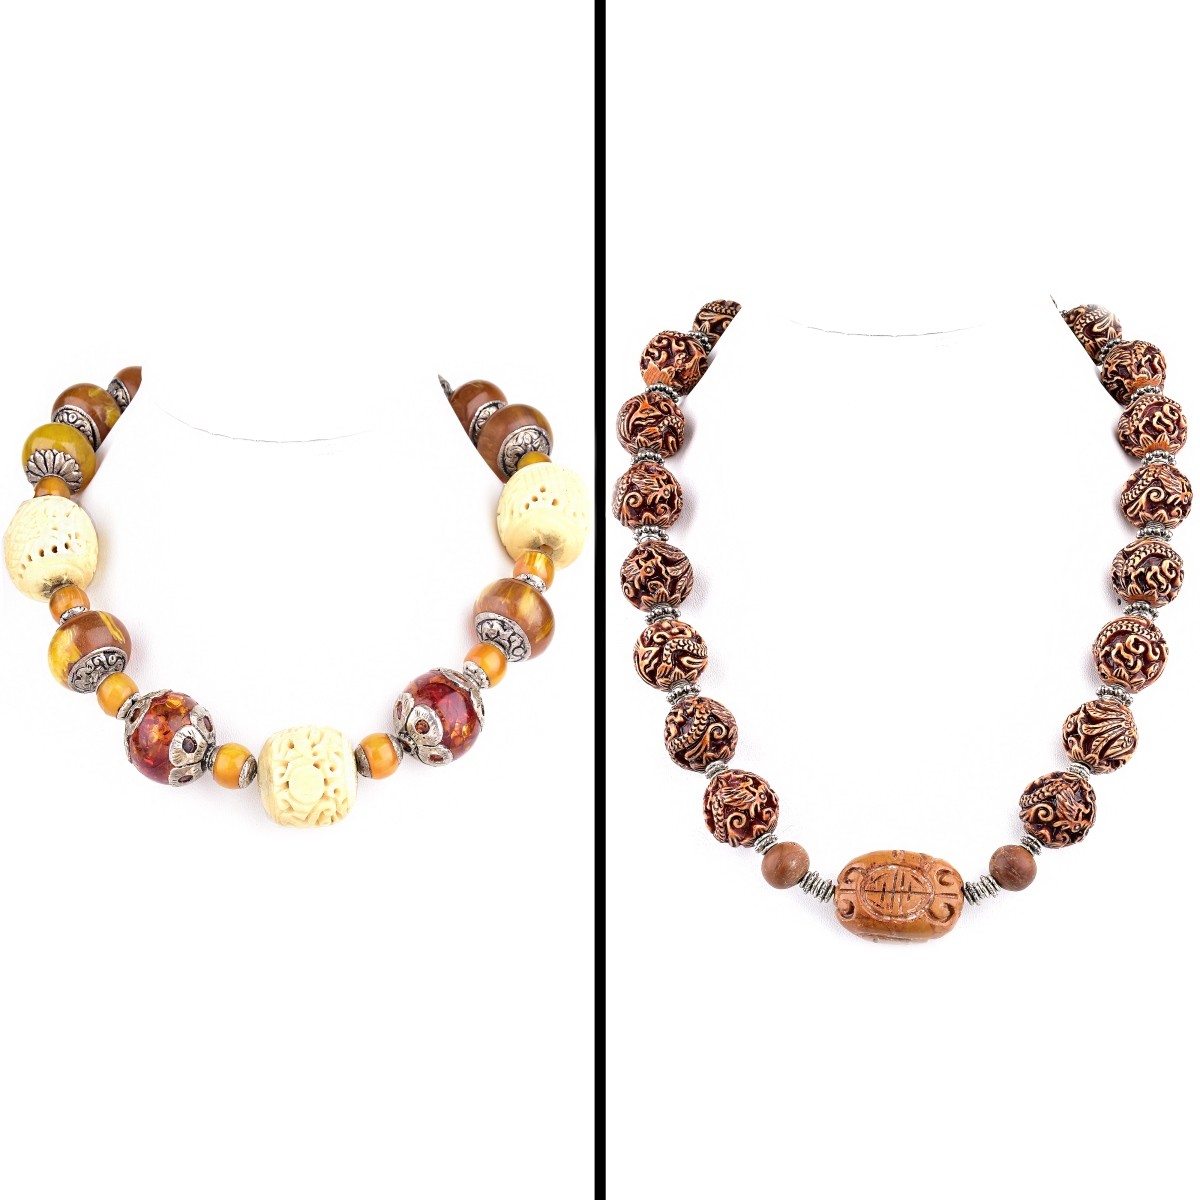 Two (2) Vintage Chunky Bead Necklaces